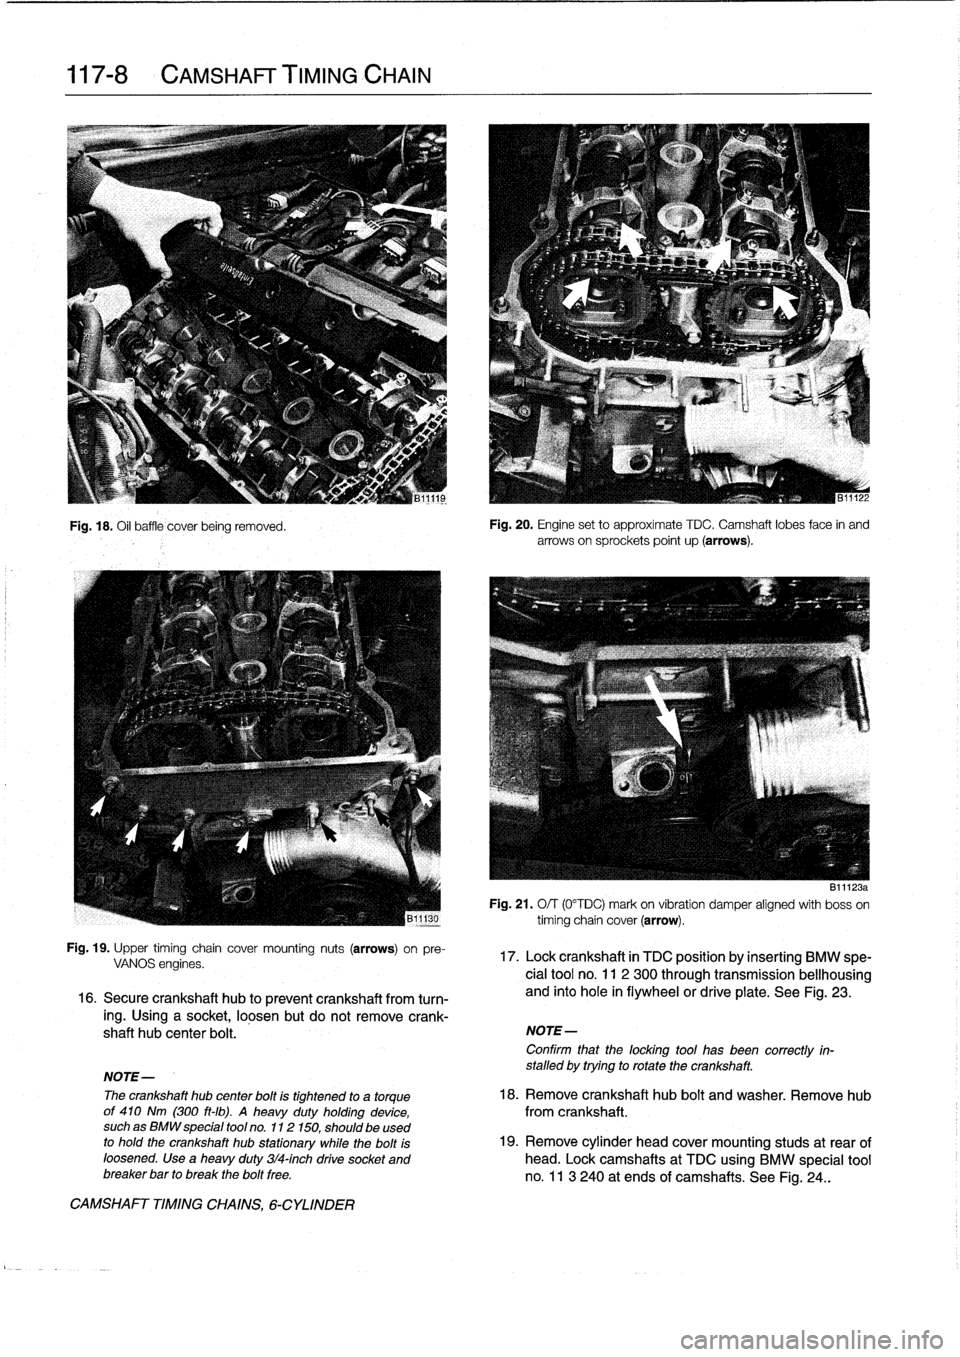 BMW 325i 1994 E36 Workshop Manual 
117-
8

	

CAMSHAFT
TIMING
CHAIN

Fig
.
18
.
Oil
baffle
cover
being
removed
.

Fig
.
19
.
Upper
timing
chaincover
mounting
nuts
(arrows)
on
pre-
VANOS
engines
.

16
.
Secure
crankshaft
hub
to
preven